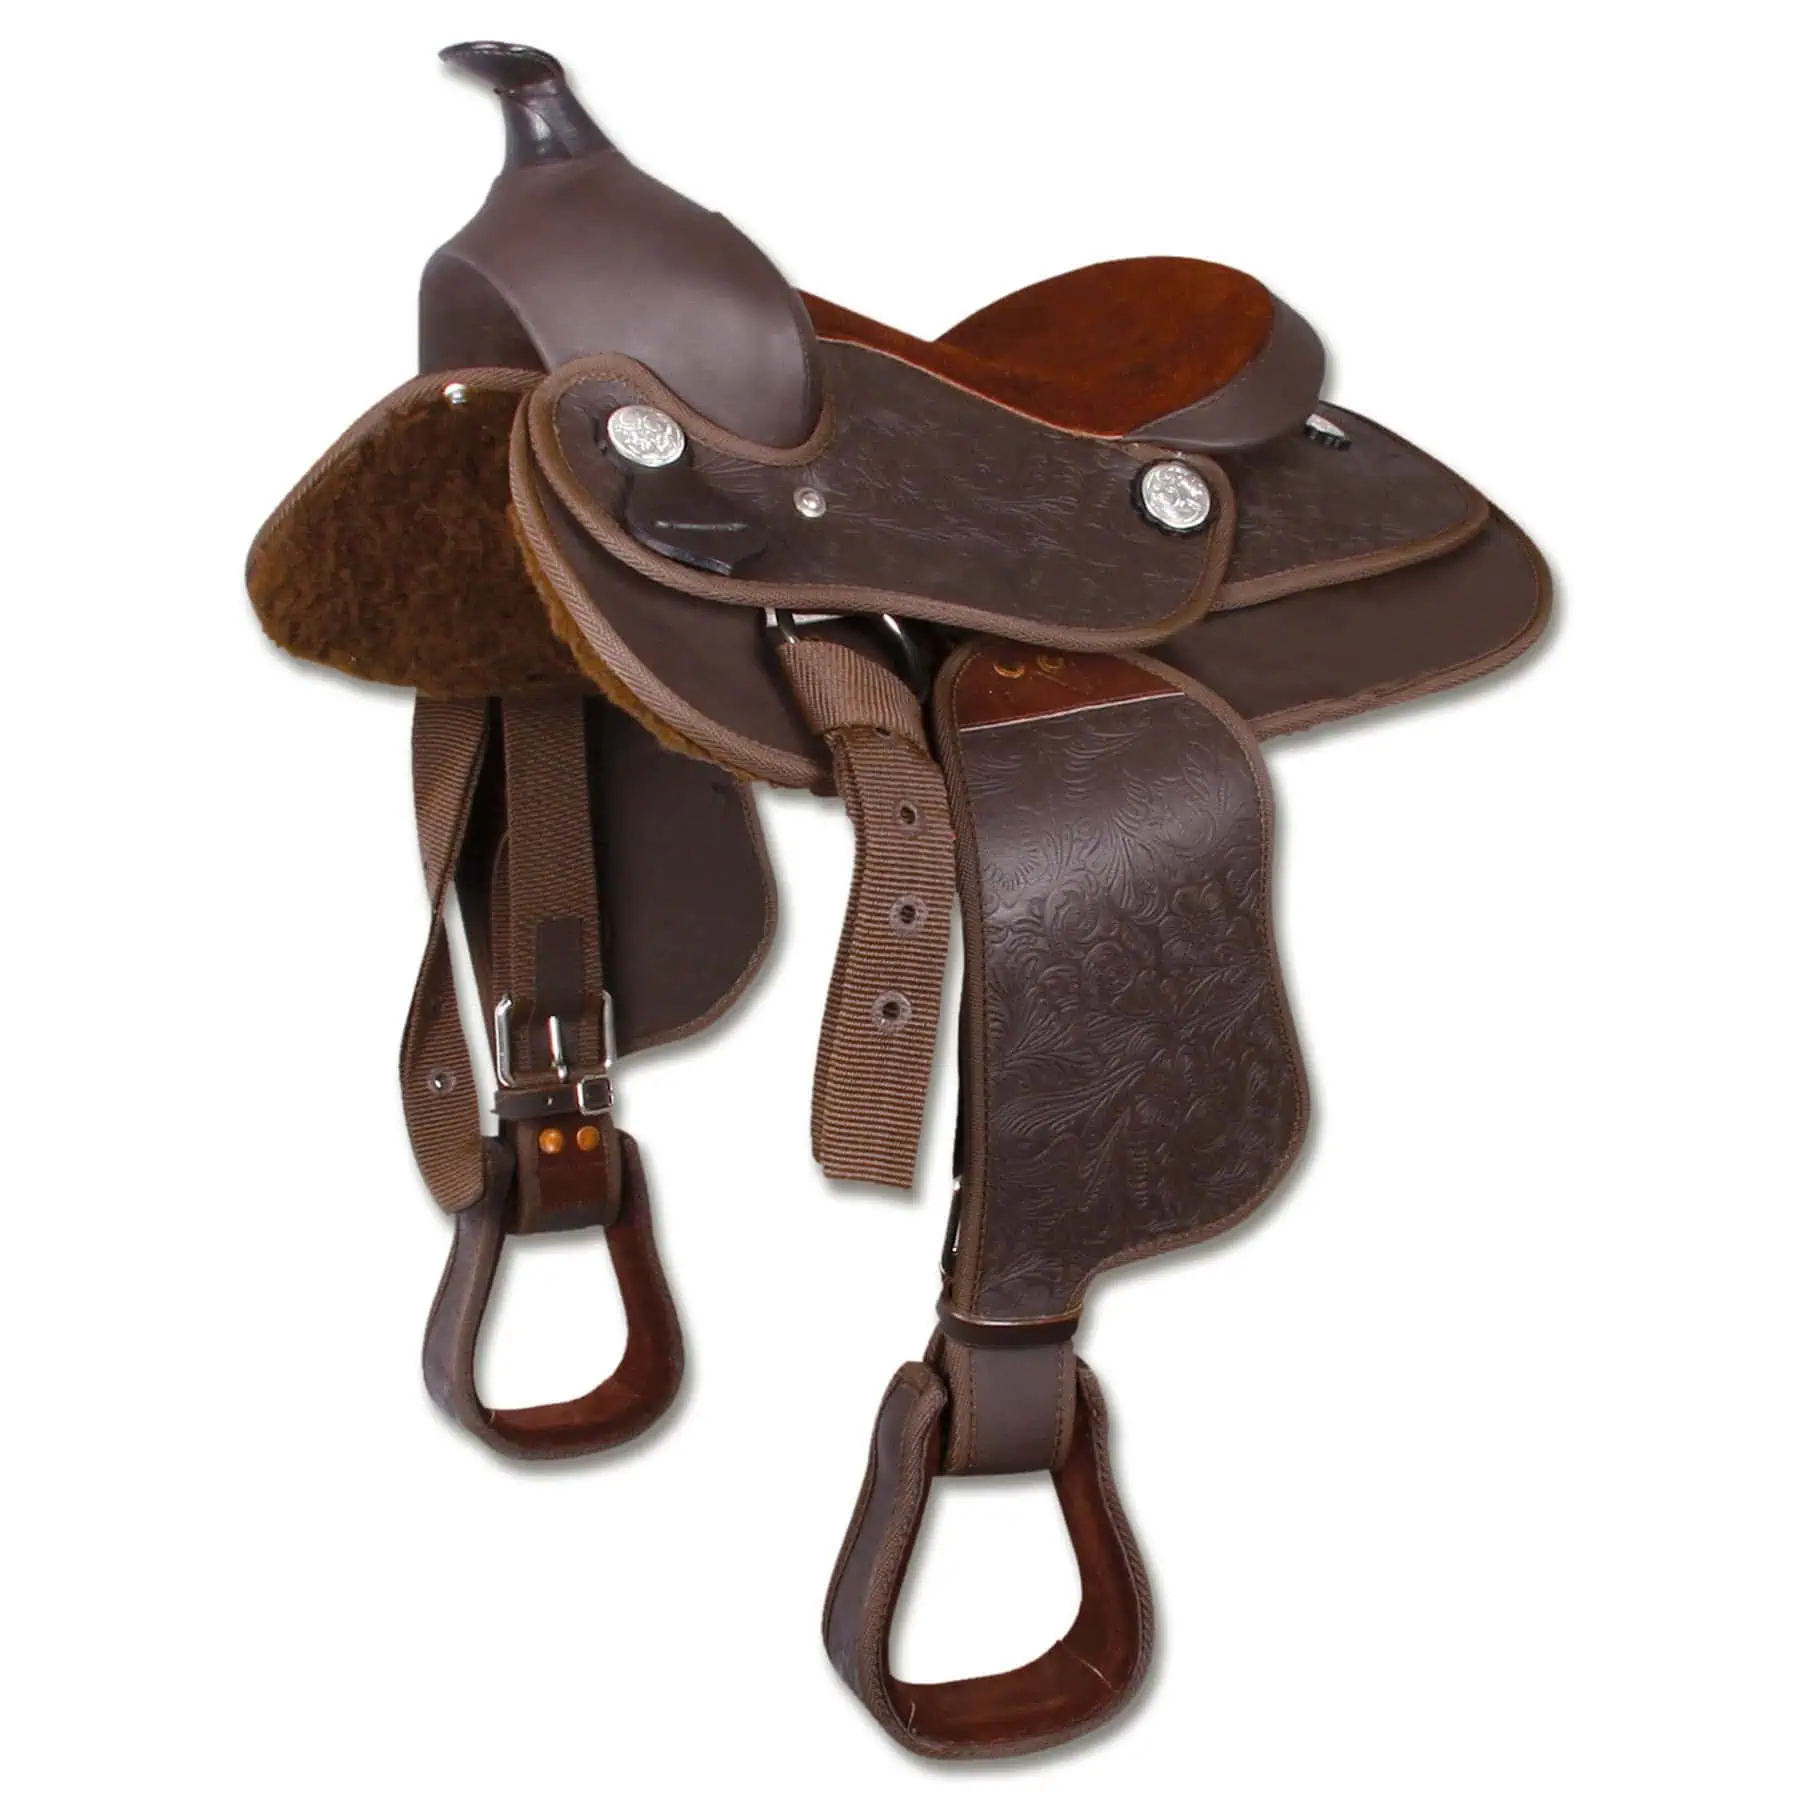 Synthetic Western saddle brown 16"/40 cm